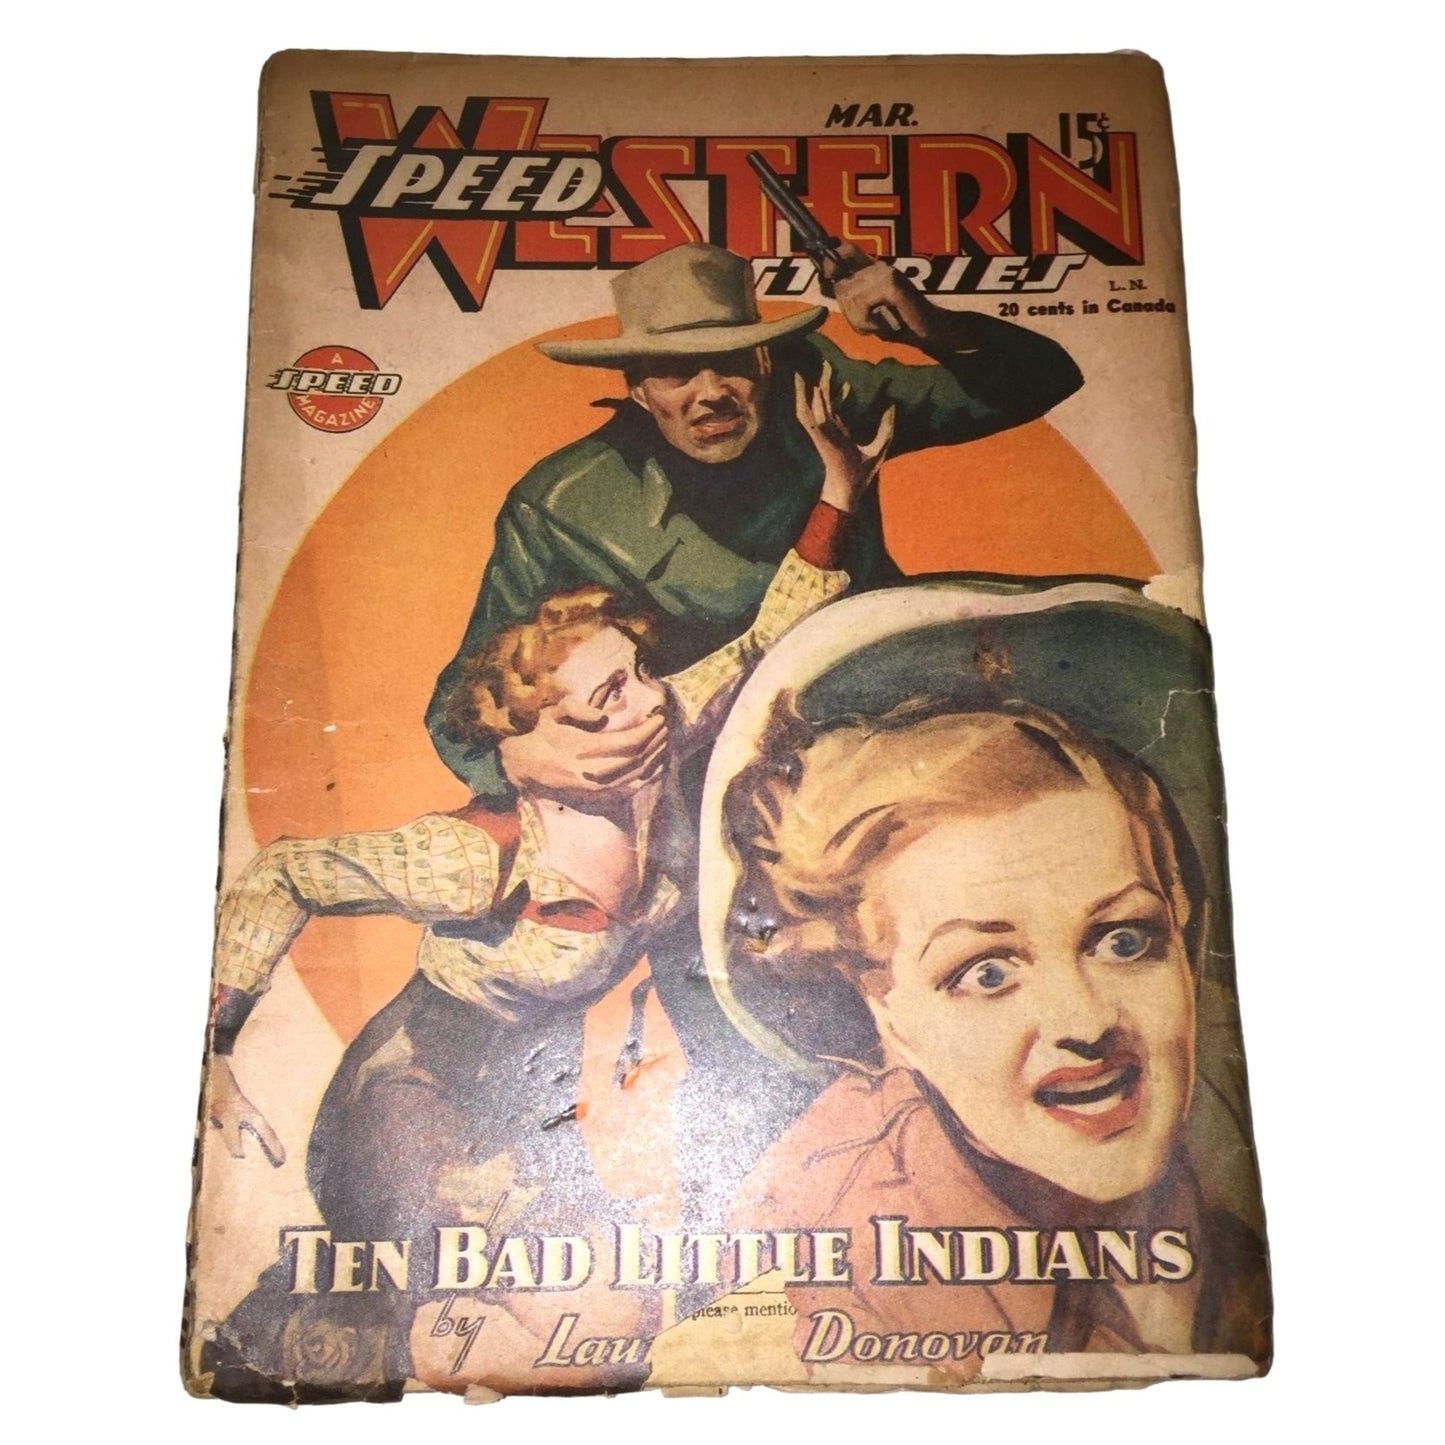 Vintage Cowboy - Speed Western Stories - March 1945 - The Bad Little Indians Pulp Cover - By Laurel Donovan